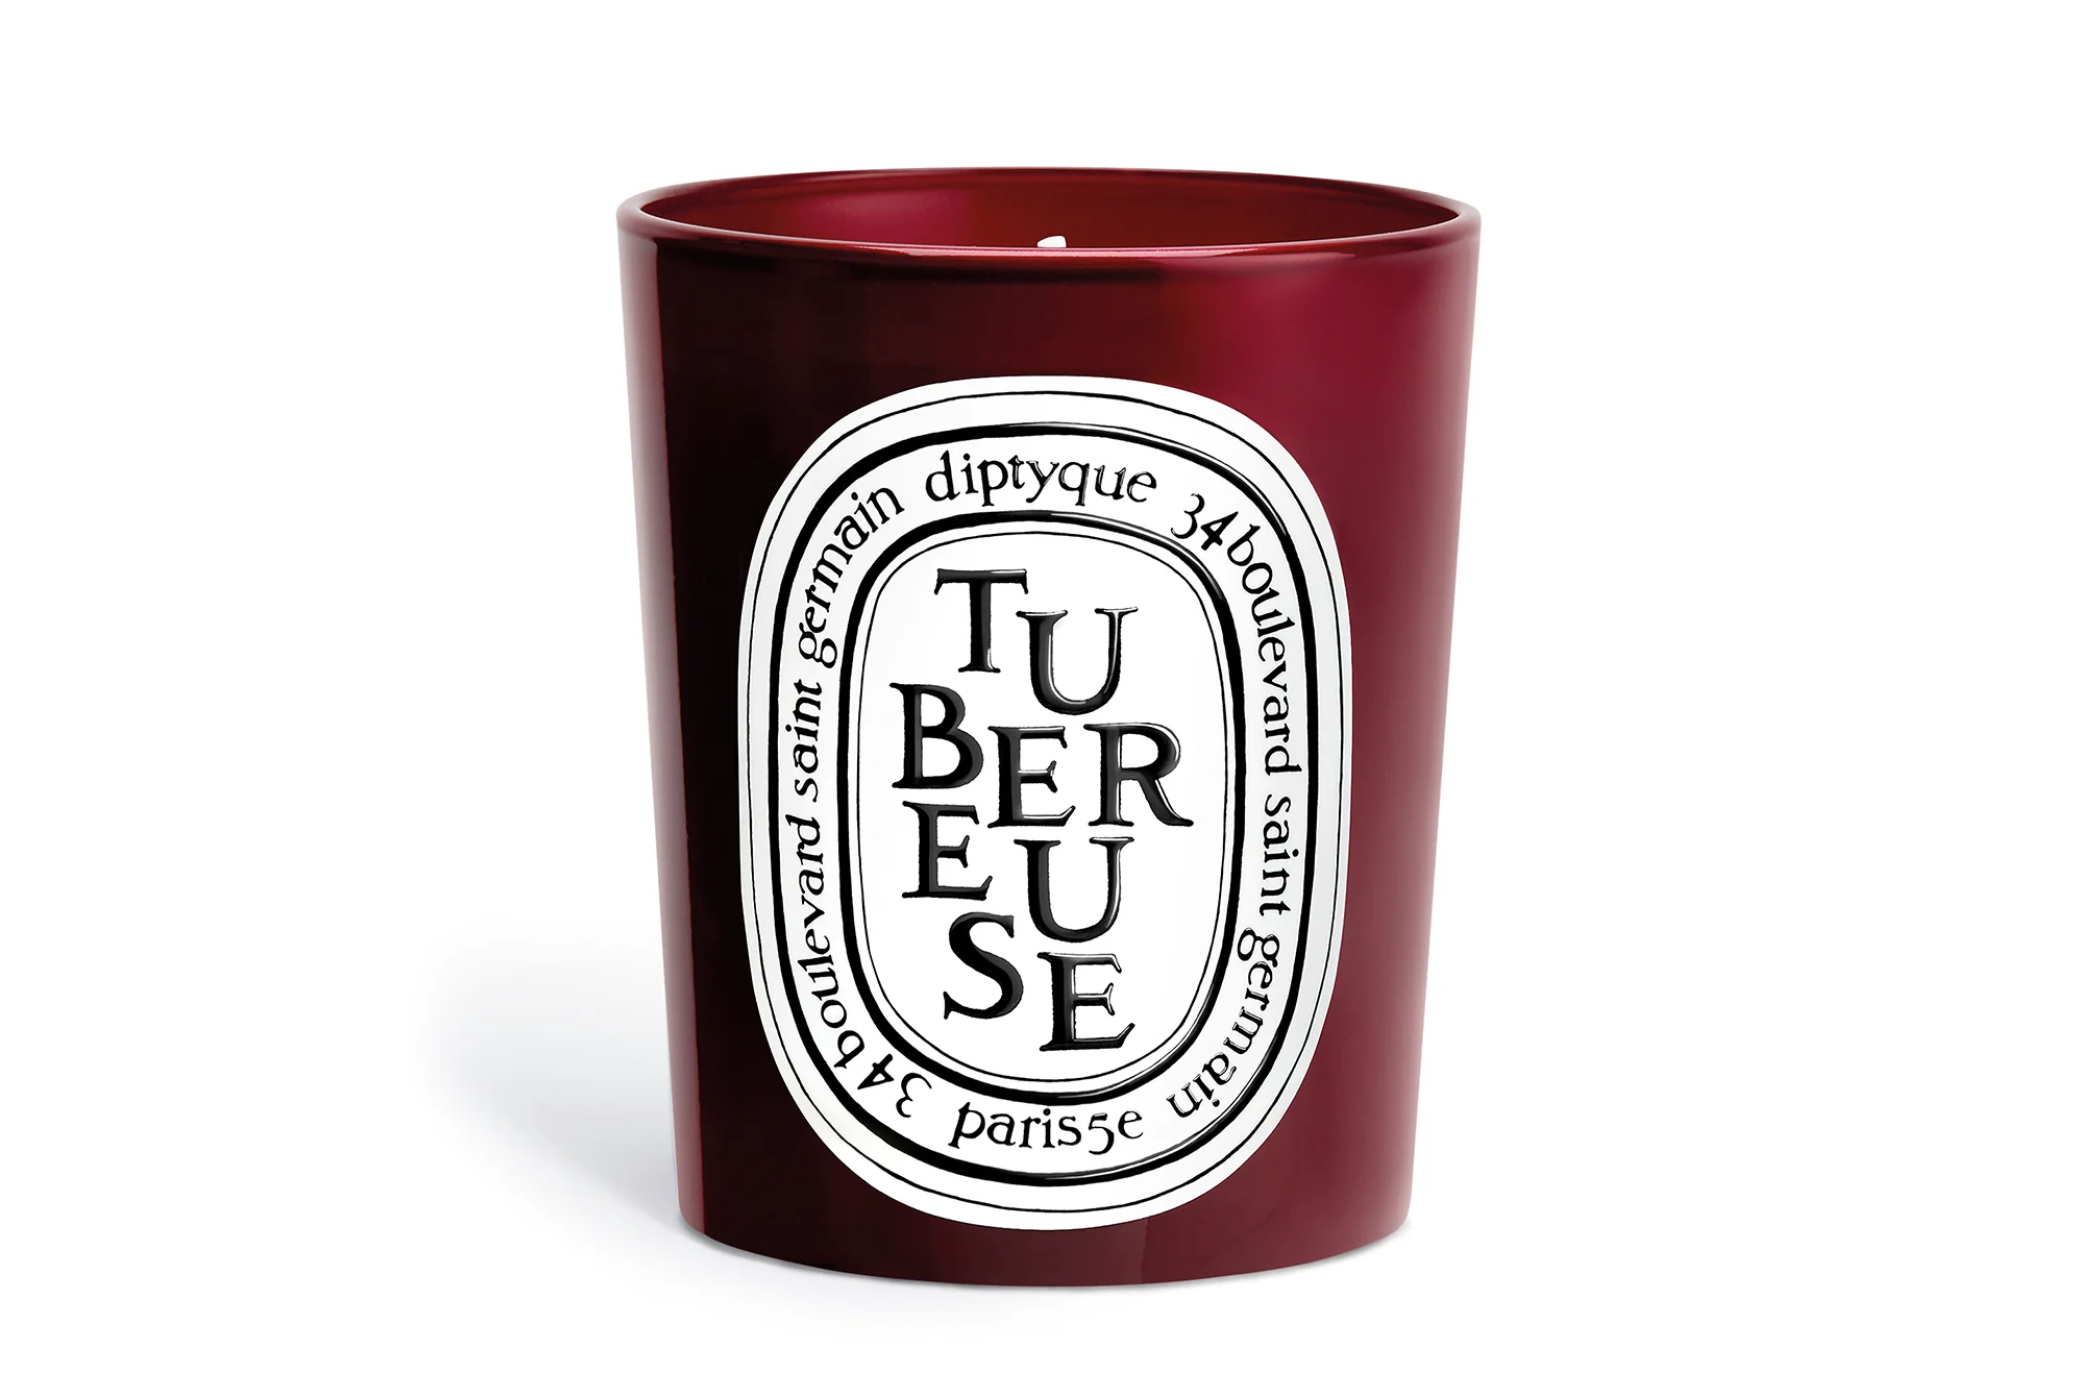 Diptyque Tubéreuse Scented Candle